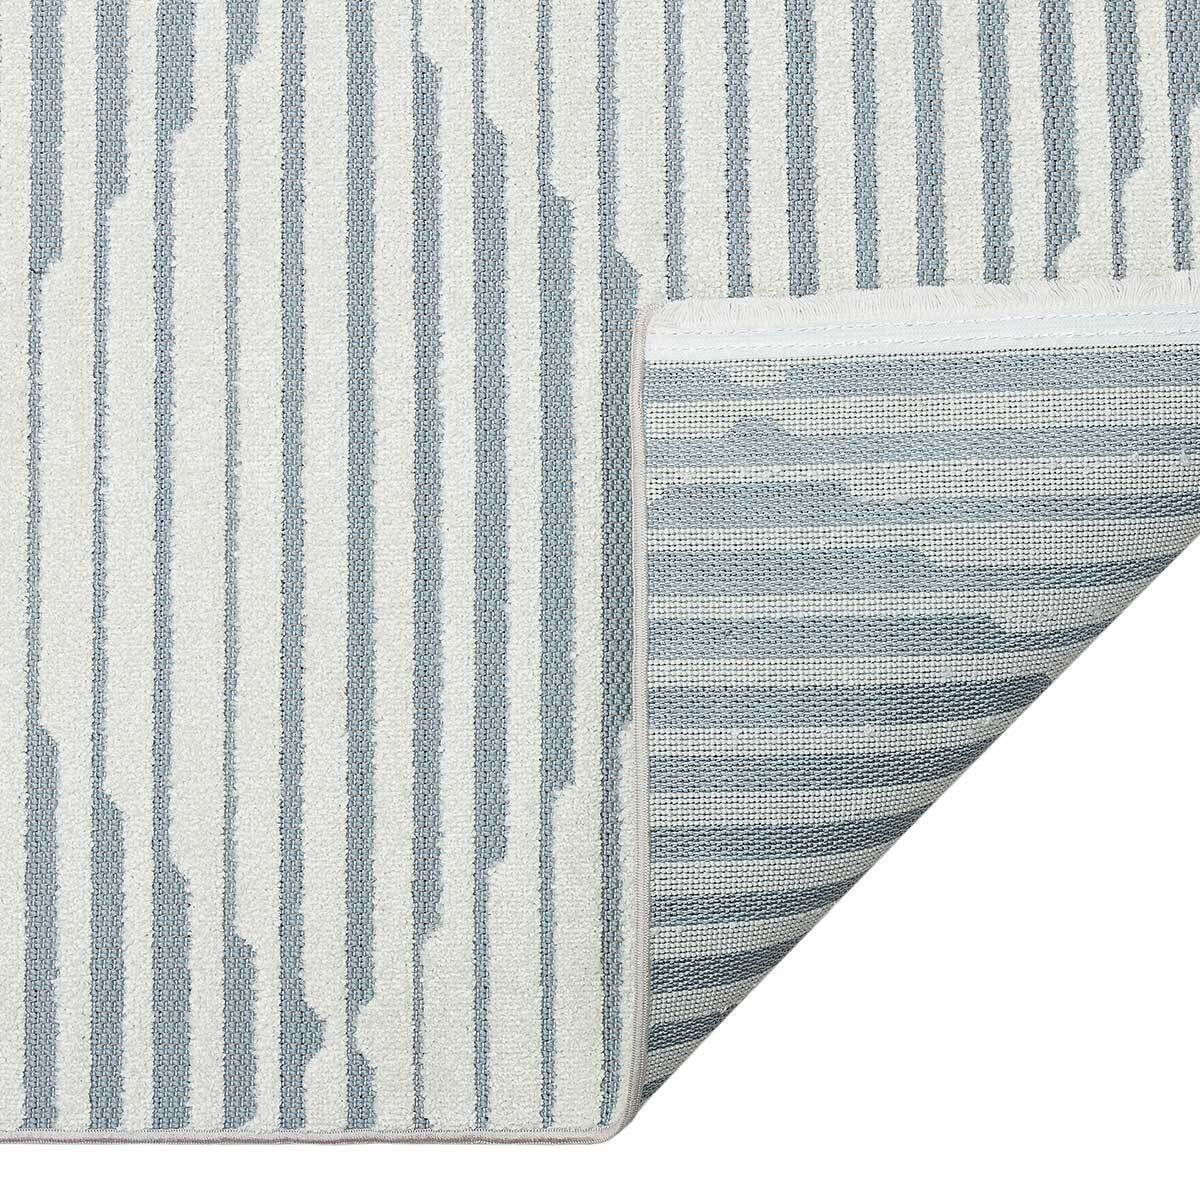 Jazz - Diamond Blue Indoor and Outdoor Rug - 290cm x 190cm product image